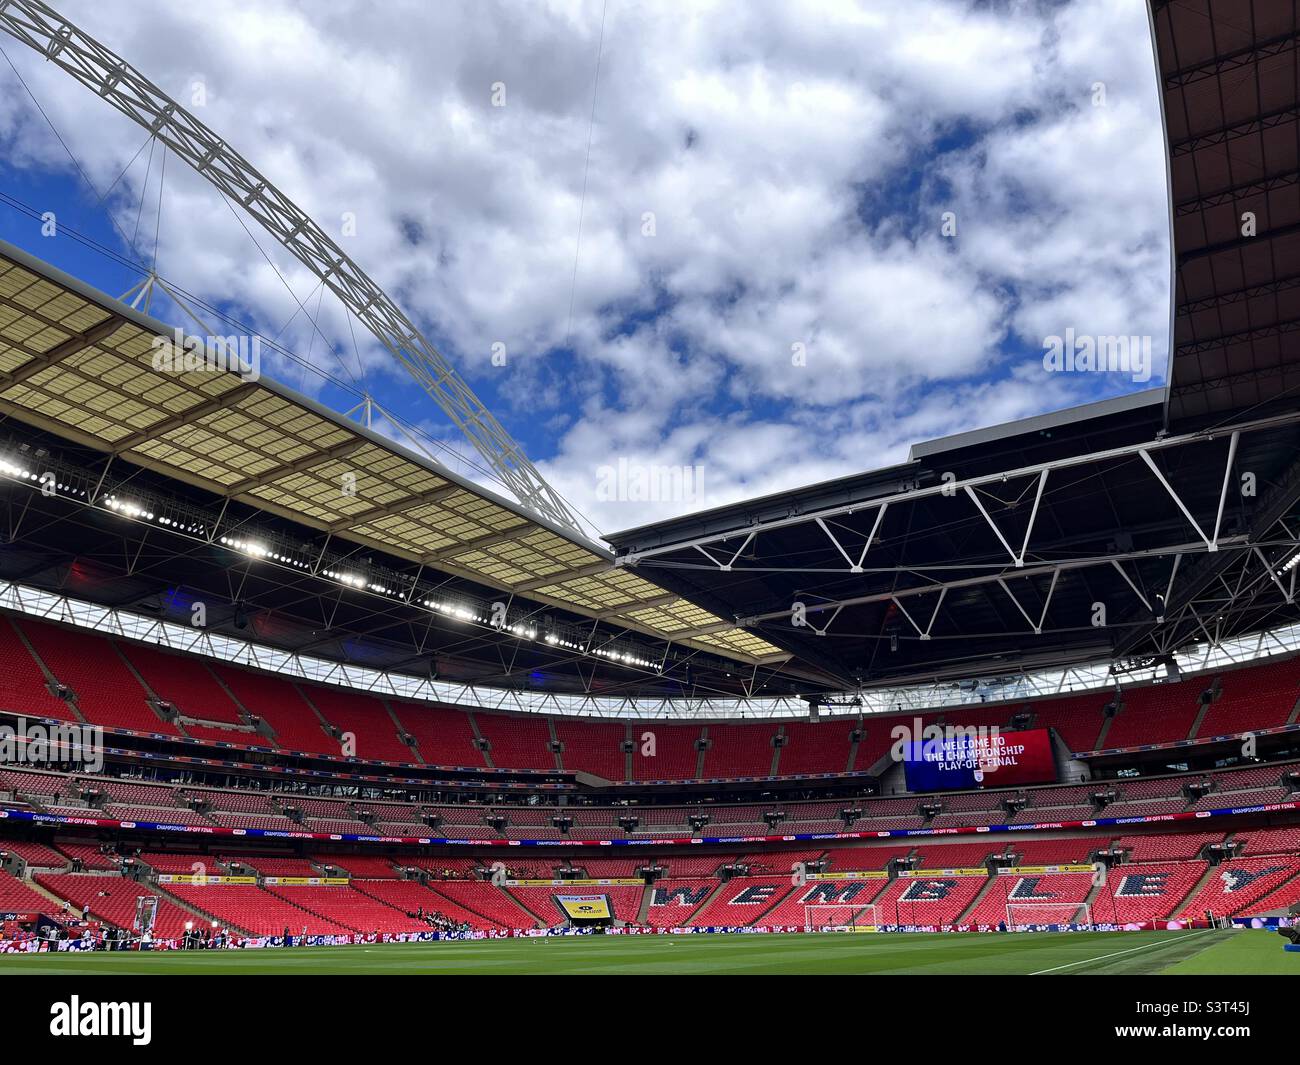 A general view of the football pitch at Wembley Stadium in London. Stock Photo